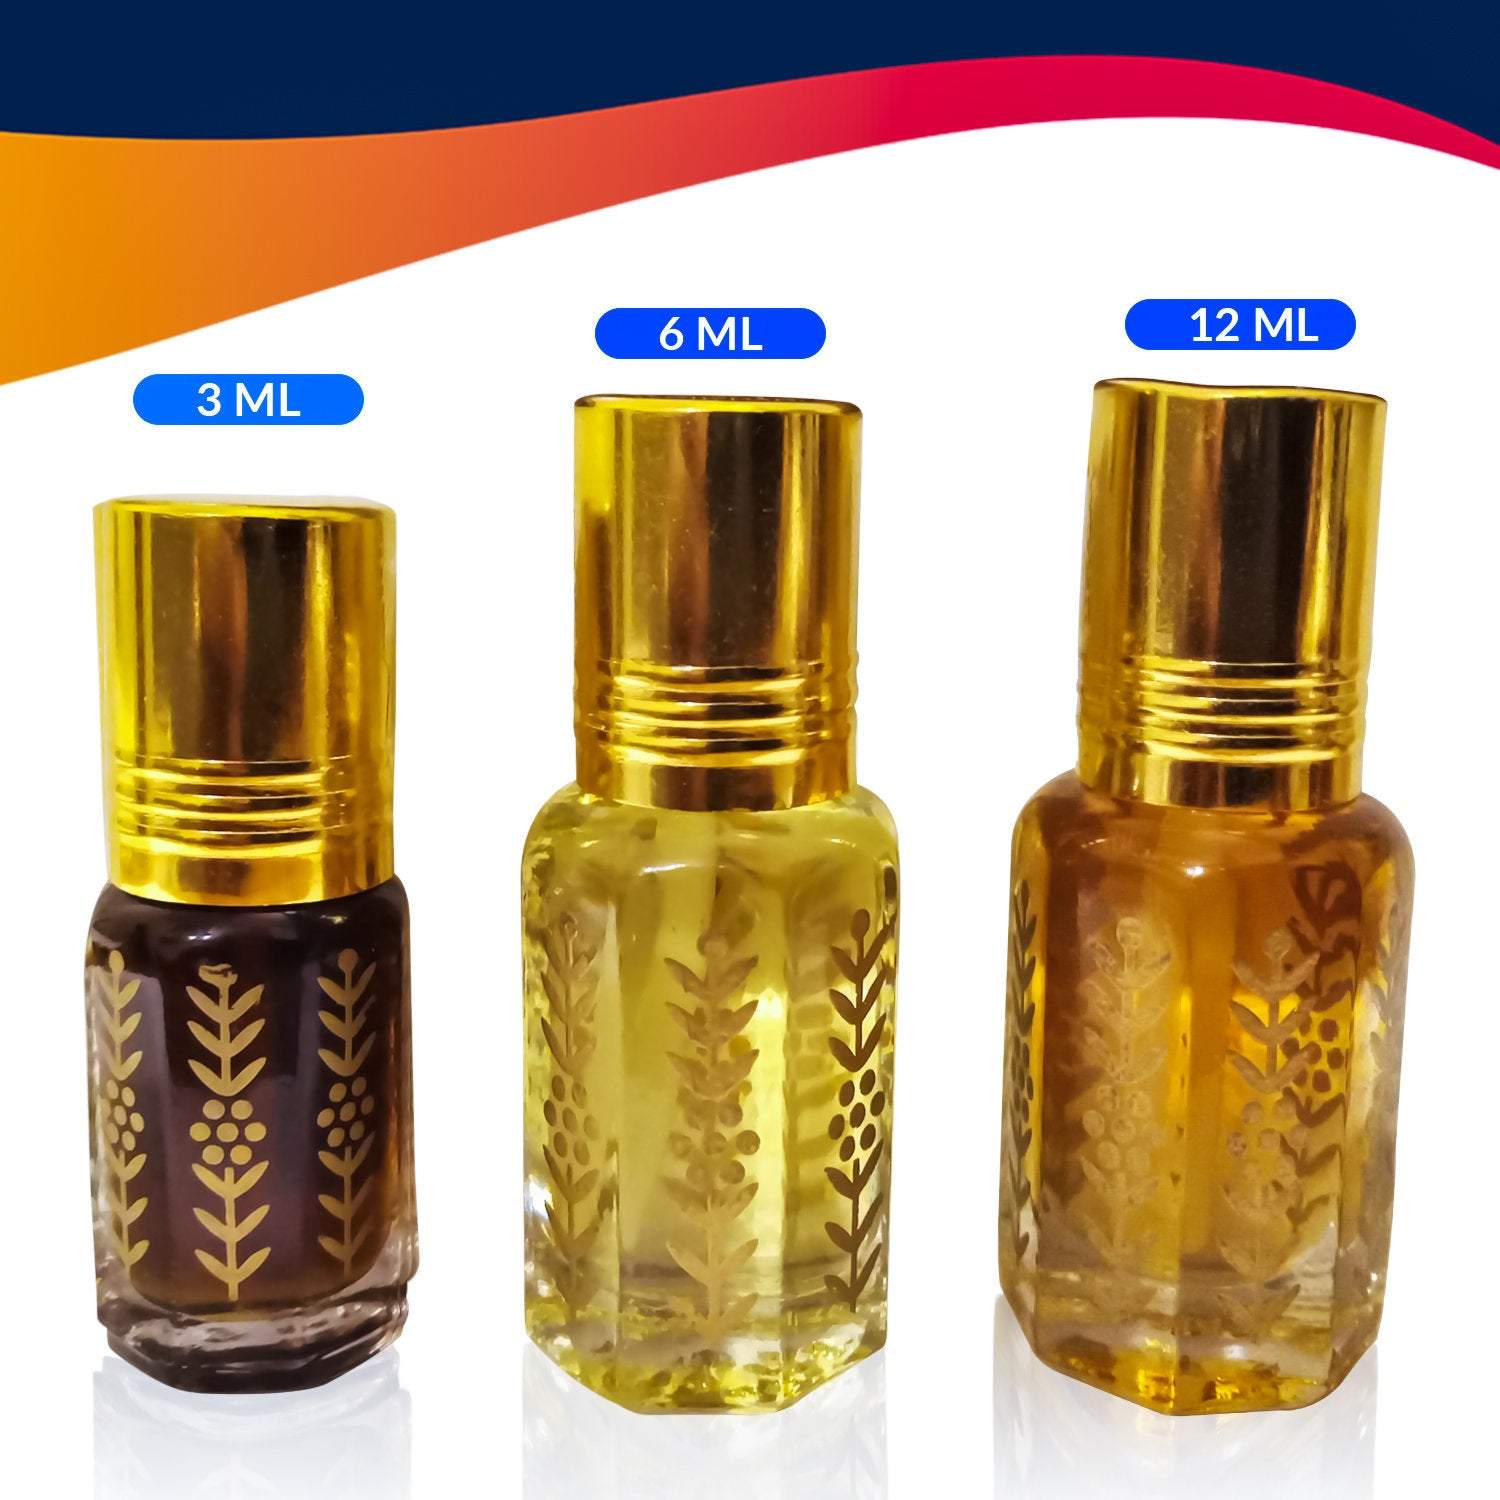 Amber Musk - Musk Amber - Attar - Concenrated Fragrance Oil - ITR